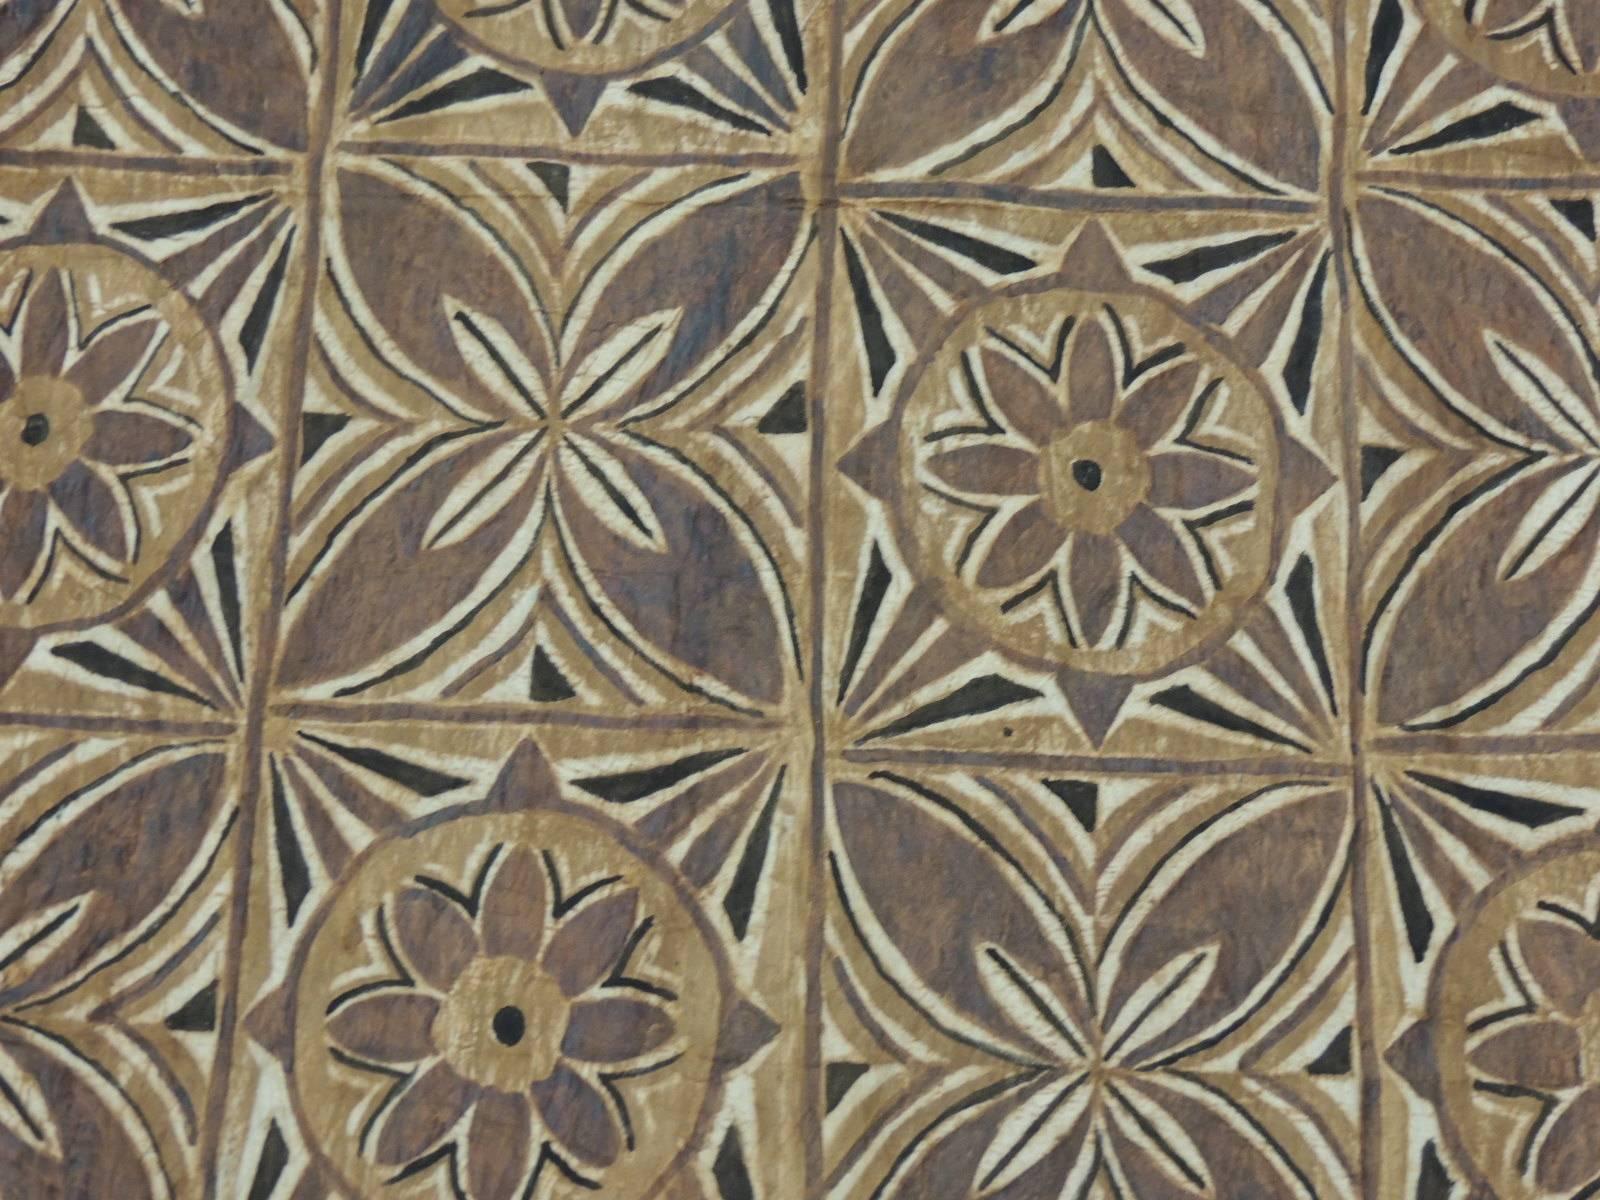 Tapa Decorative Artisanal Brown and Orange Paper Art
Tapa paper is made with the bark cloth panels with a floral design on geometric squares.  
Tapa decorative paper in shades of brown, natural and orange embellish the art.
Size:  46” x 51” 
